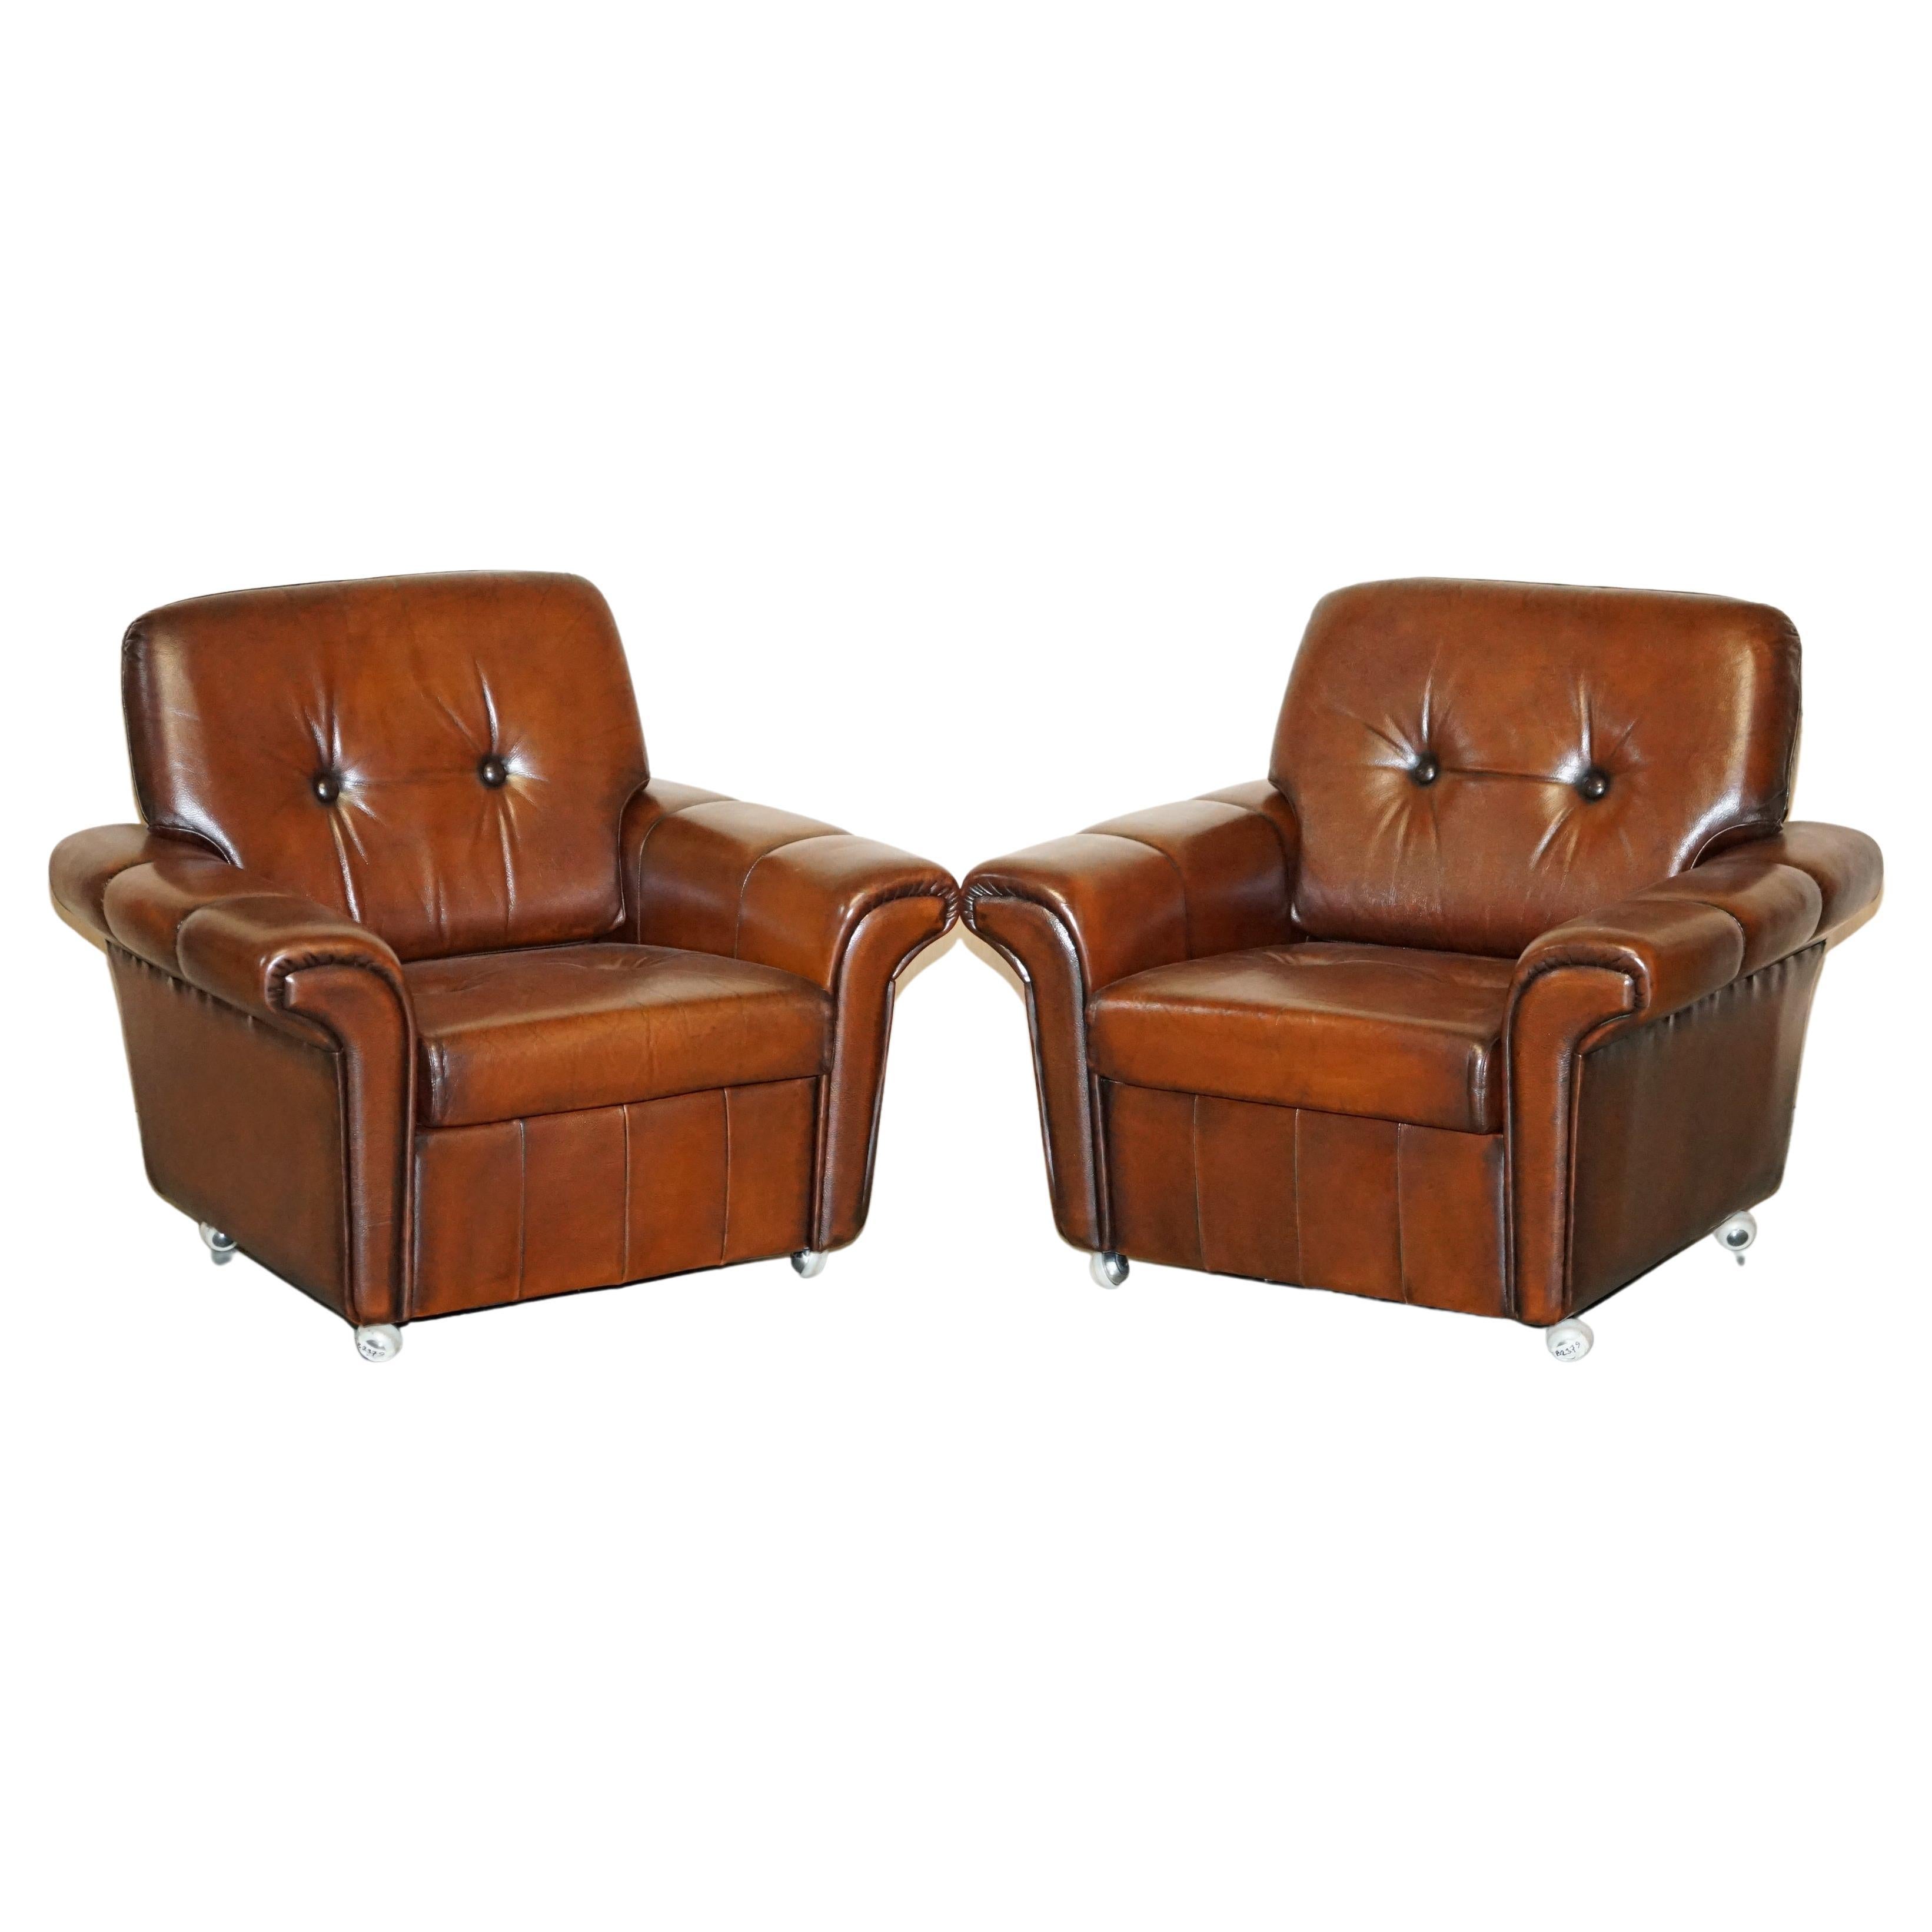 Pair of Fully Restored Vintage Dutch Mid-Century Modern Brown Leather Armchairs